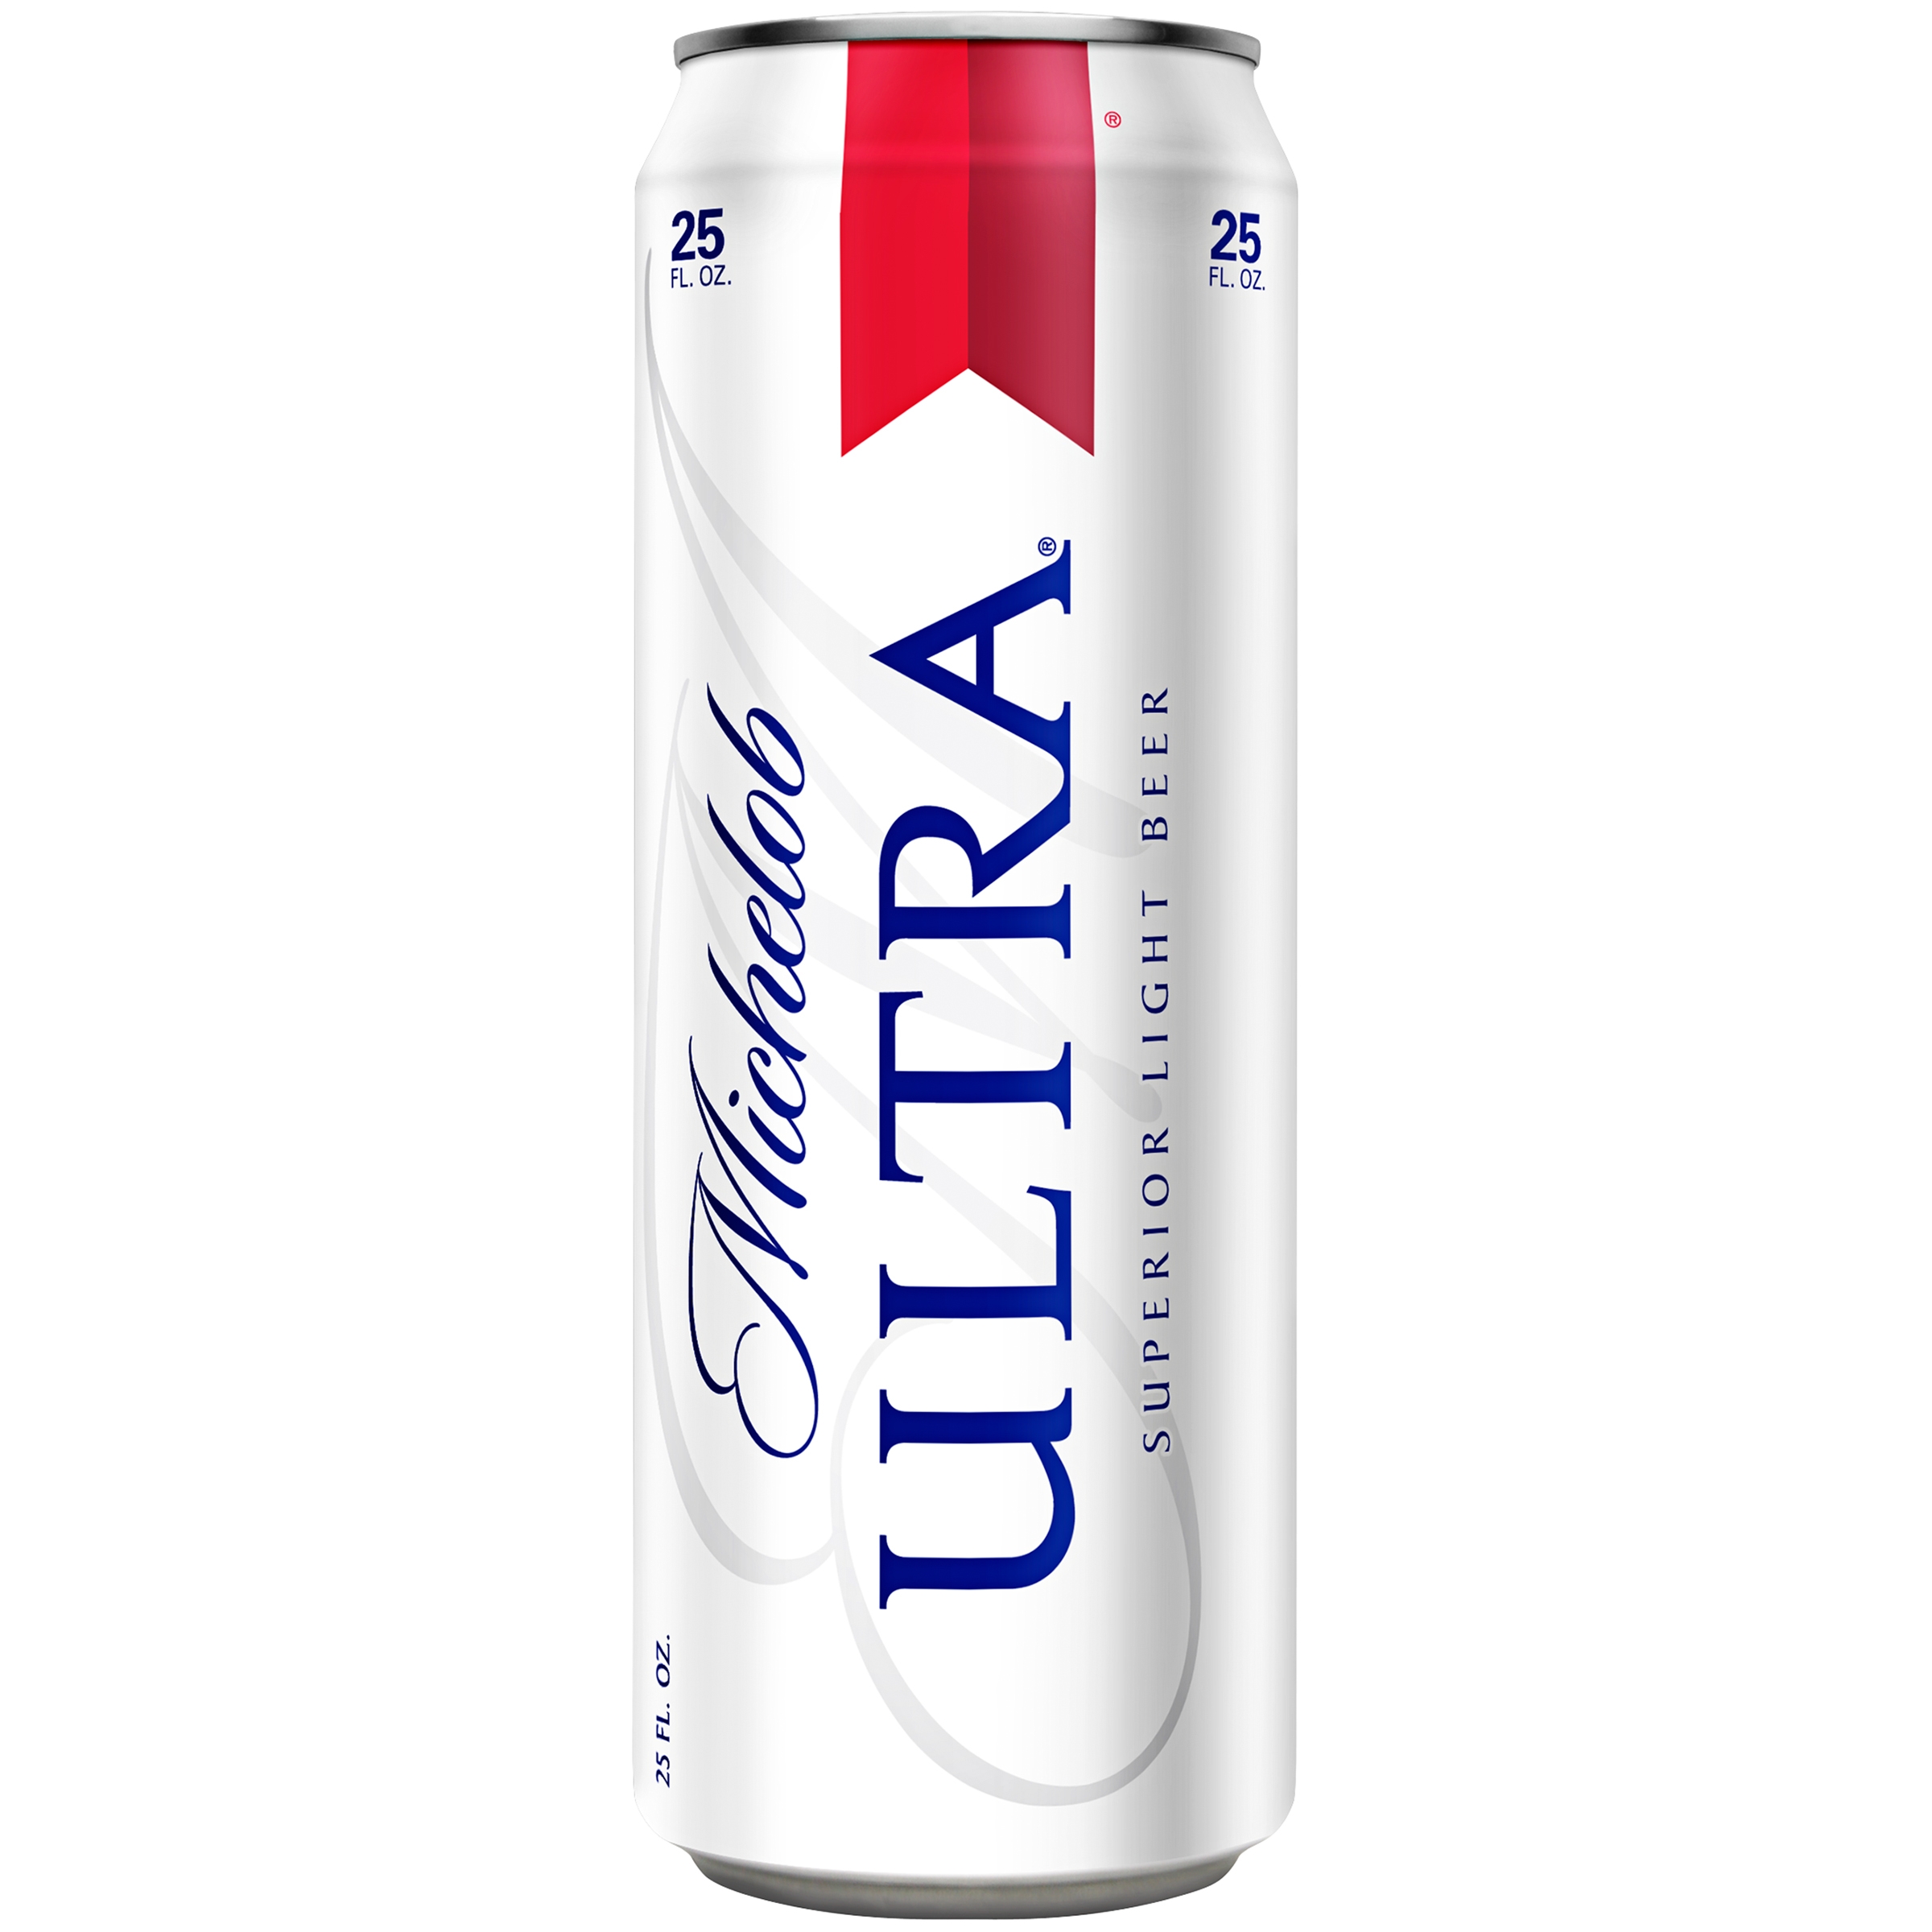 Michelob Ultra Superior Light Beer 25 Oz. Cans